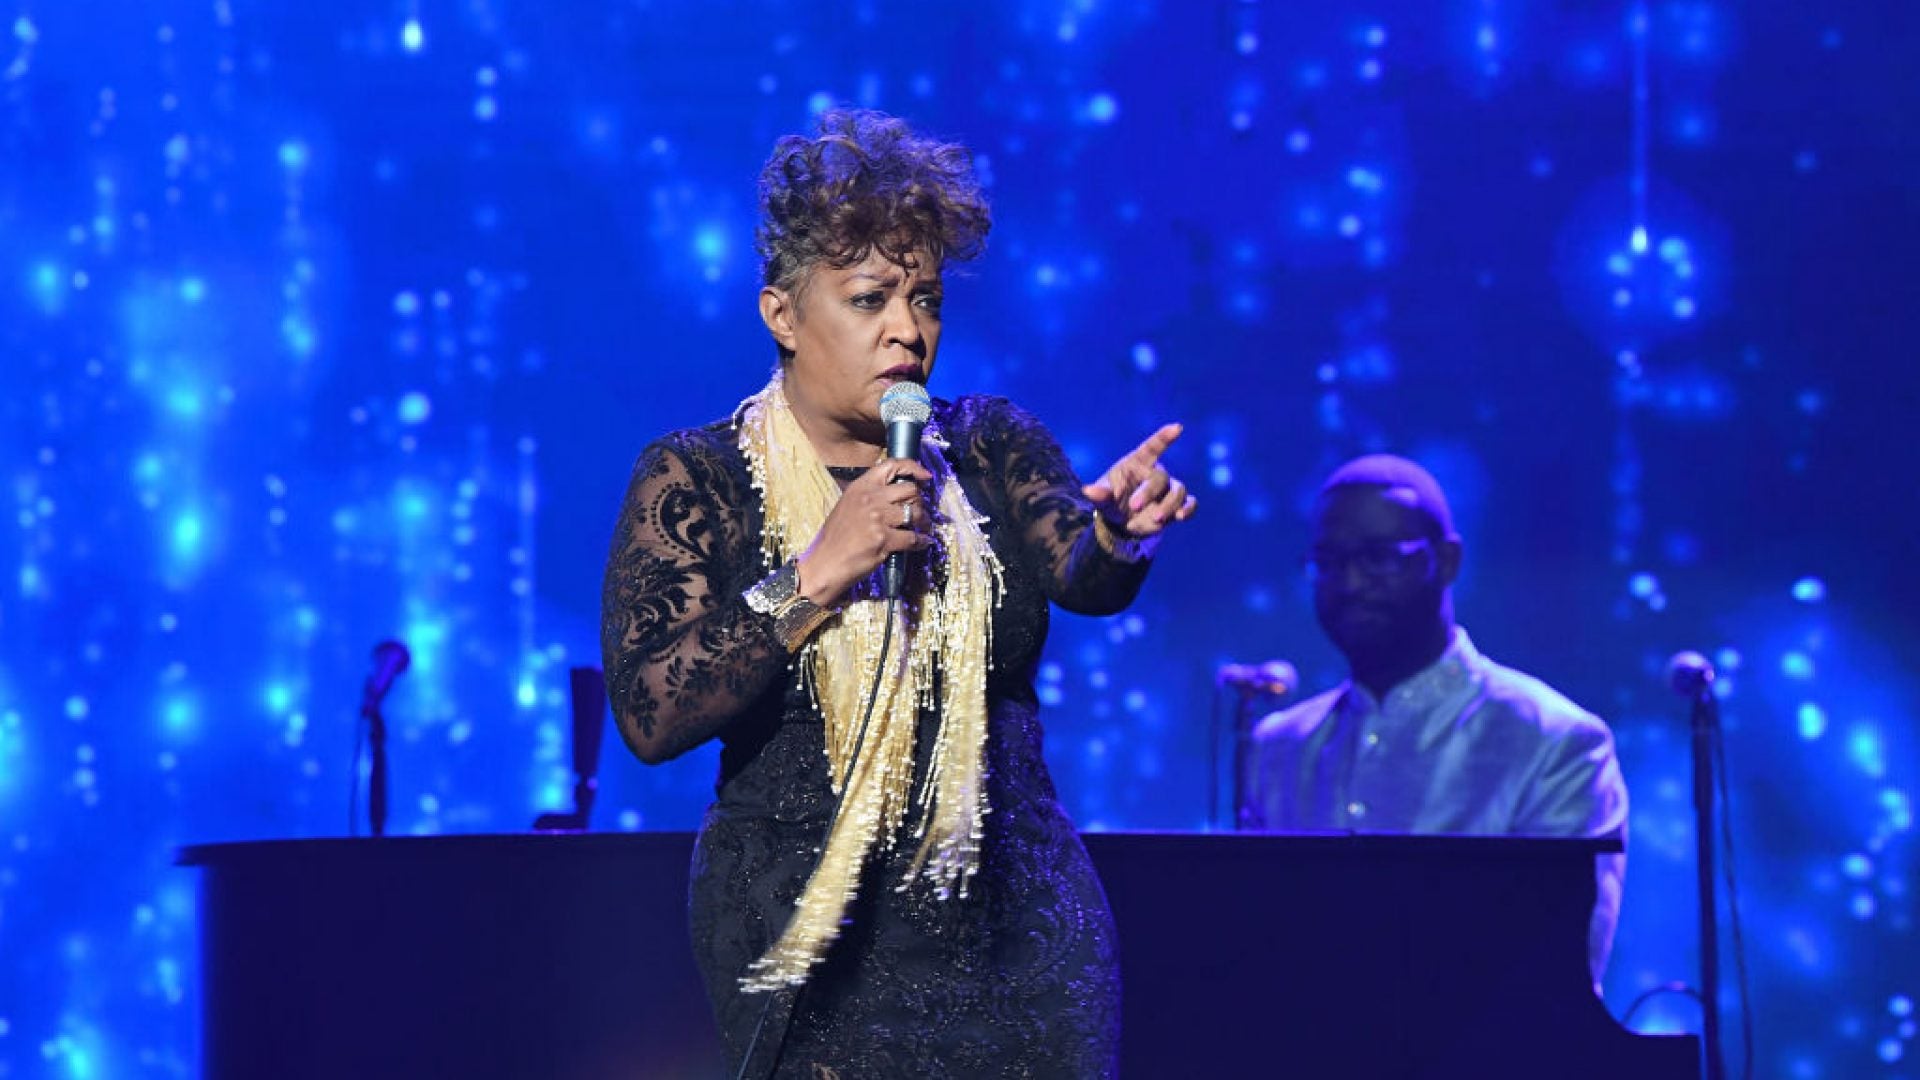 Anita Baker Asks Fans To Stop Streaming Her Music In Efforts to Retrieve Her Masters